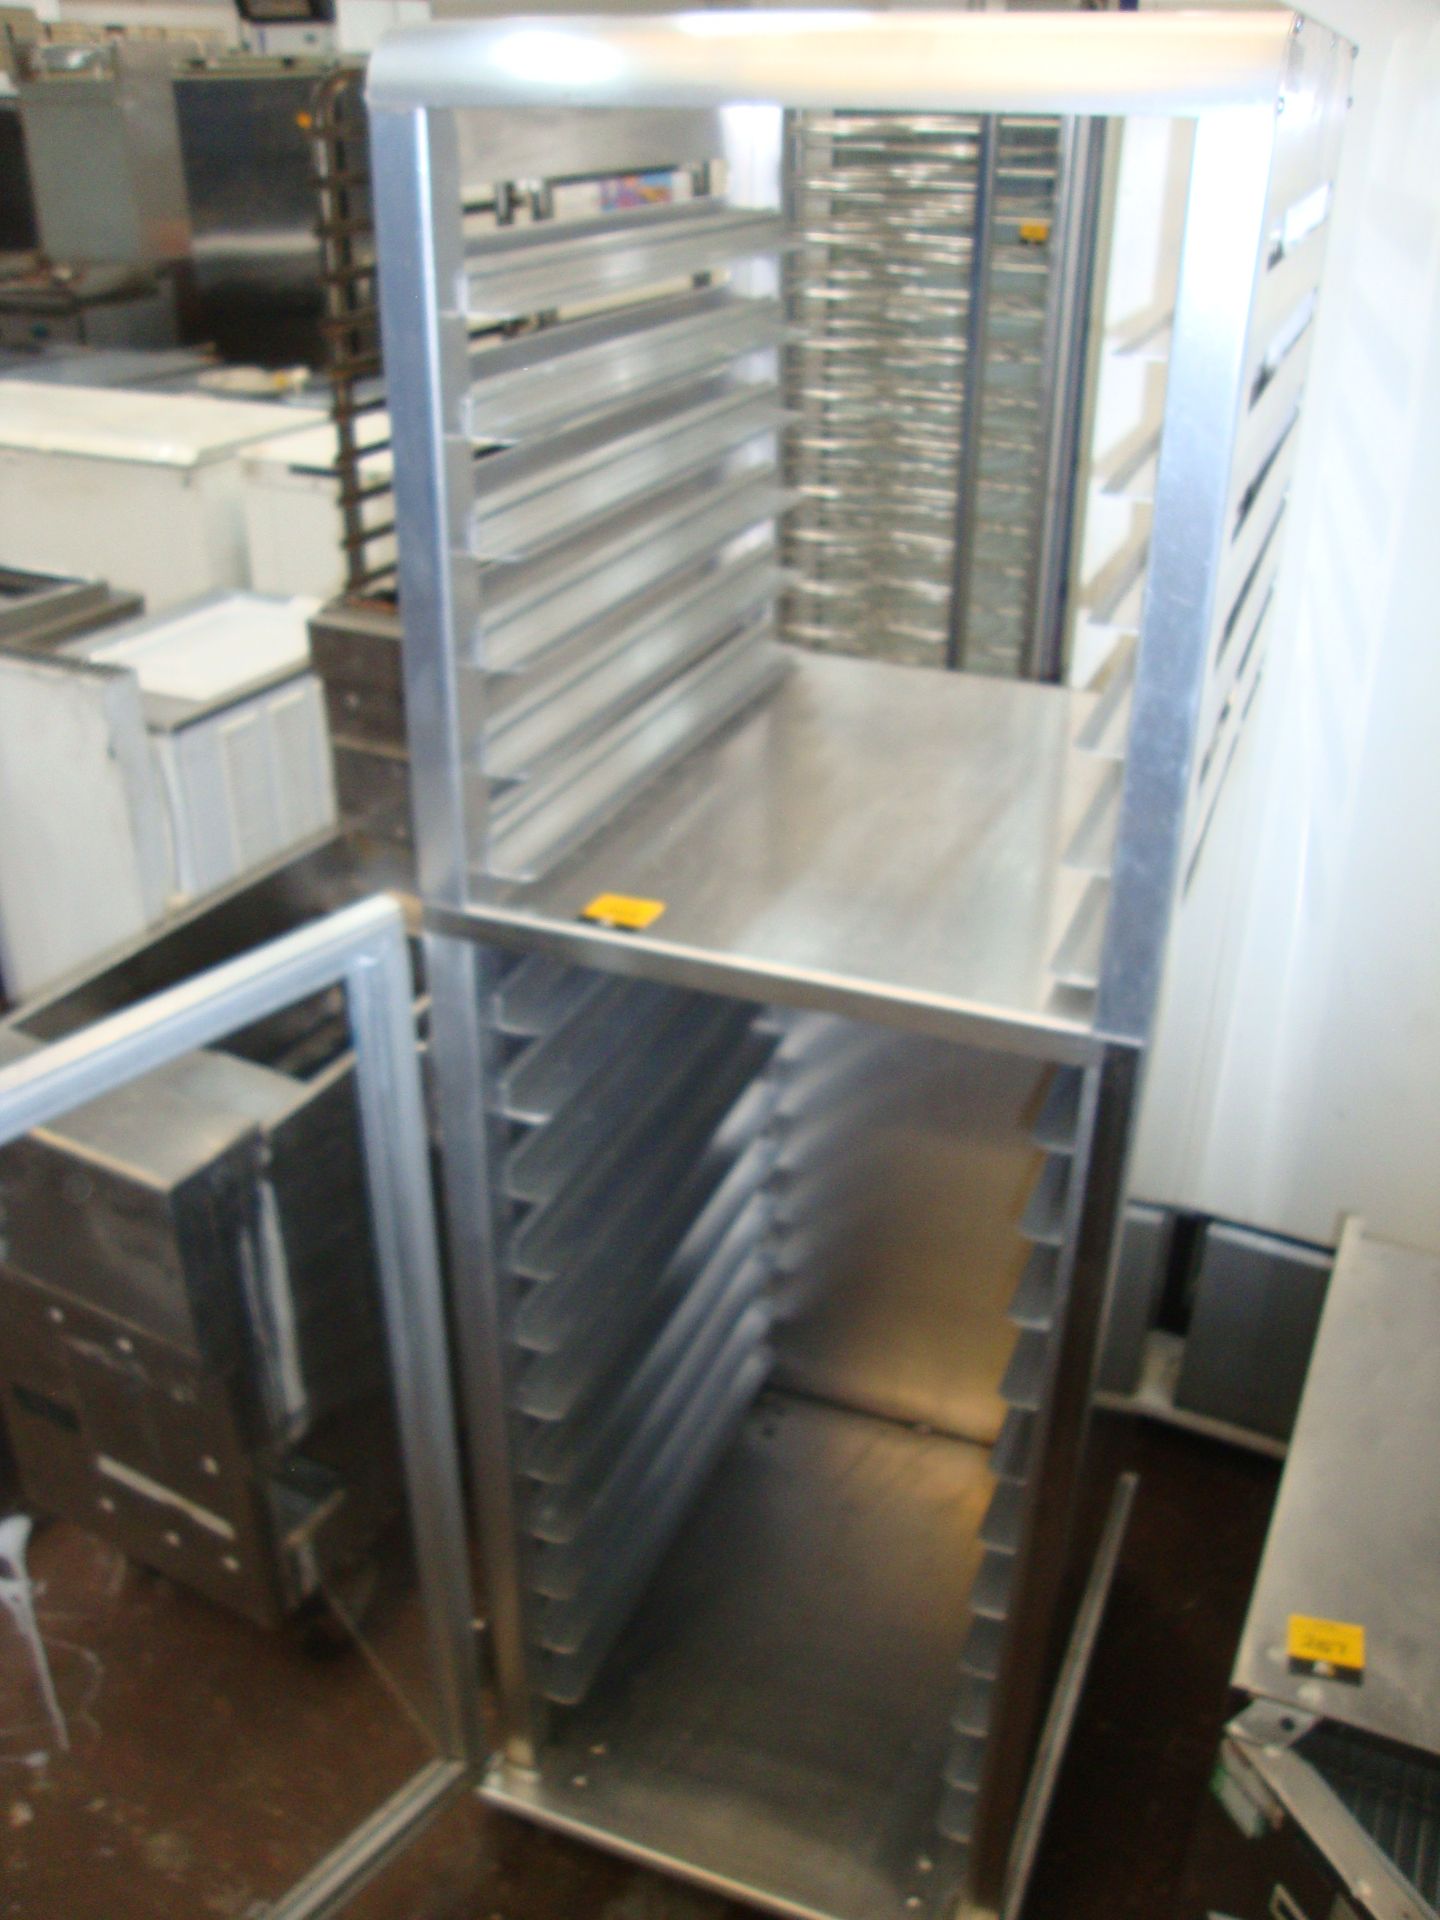 Mobile stainless steel unit comprising clear front storage compartment below and shelving for - Image 4 of 4